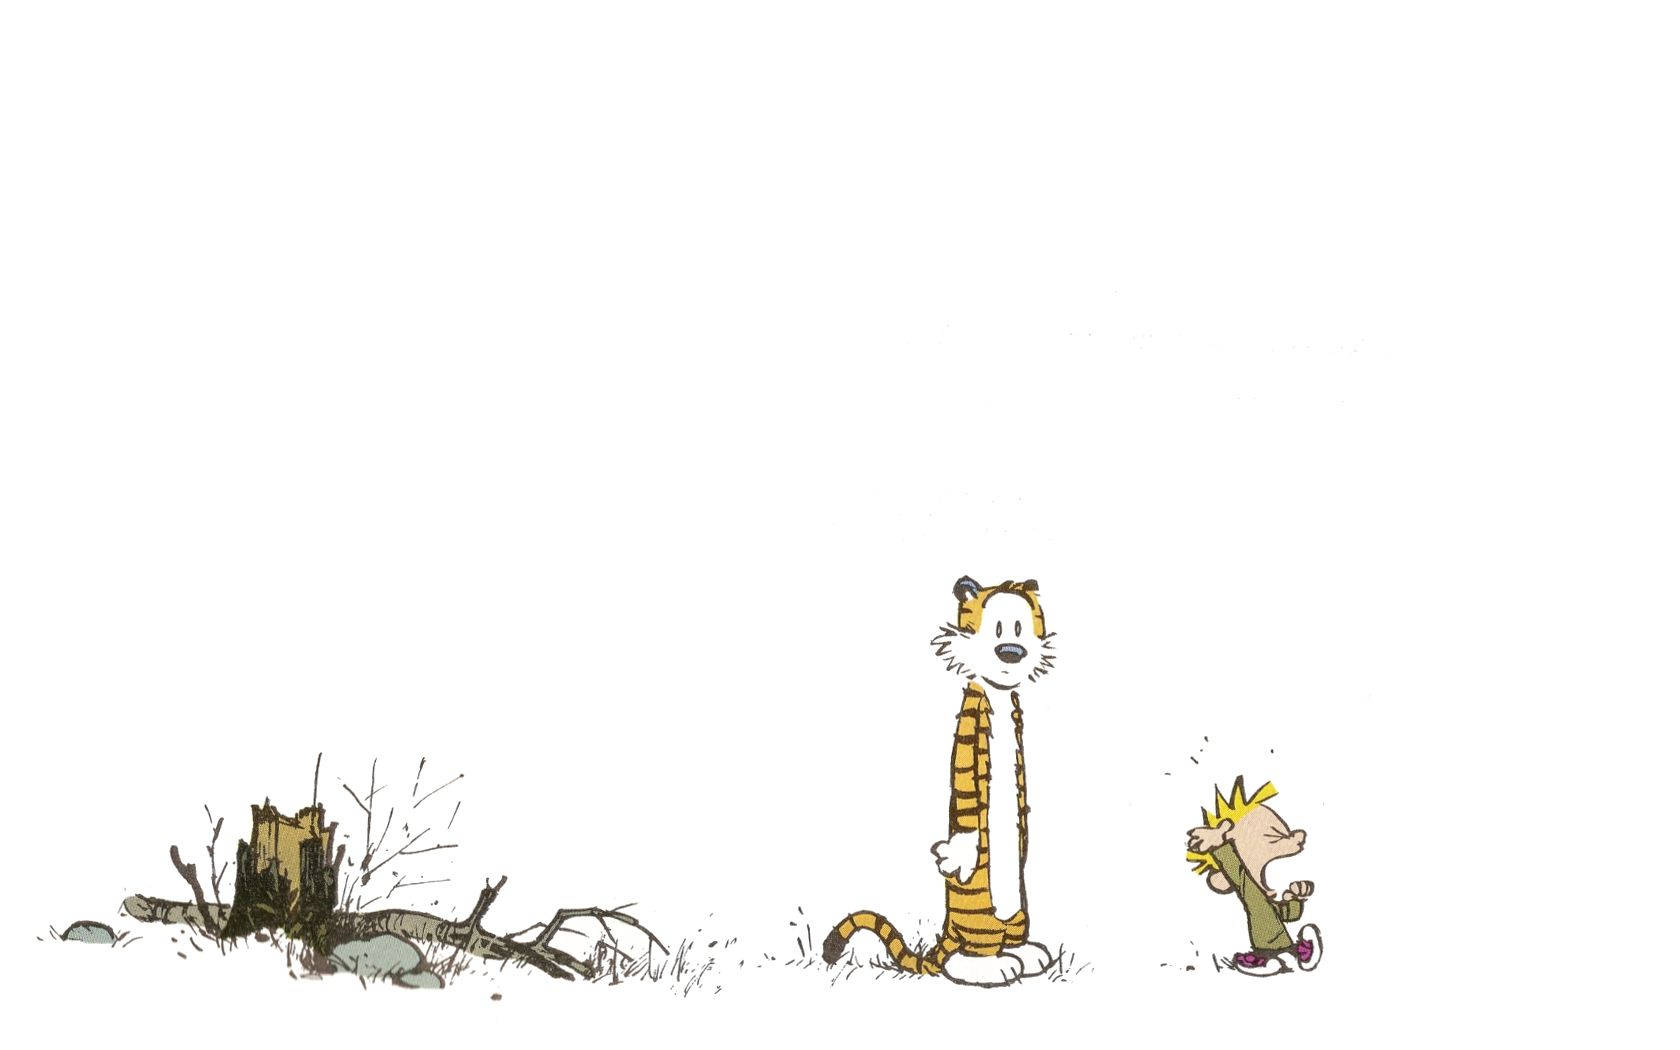 Calvin and Hobbes Cutting Down a Tree Wallpaper